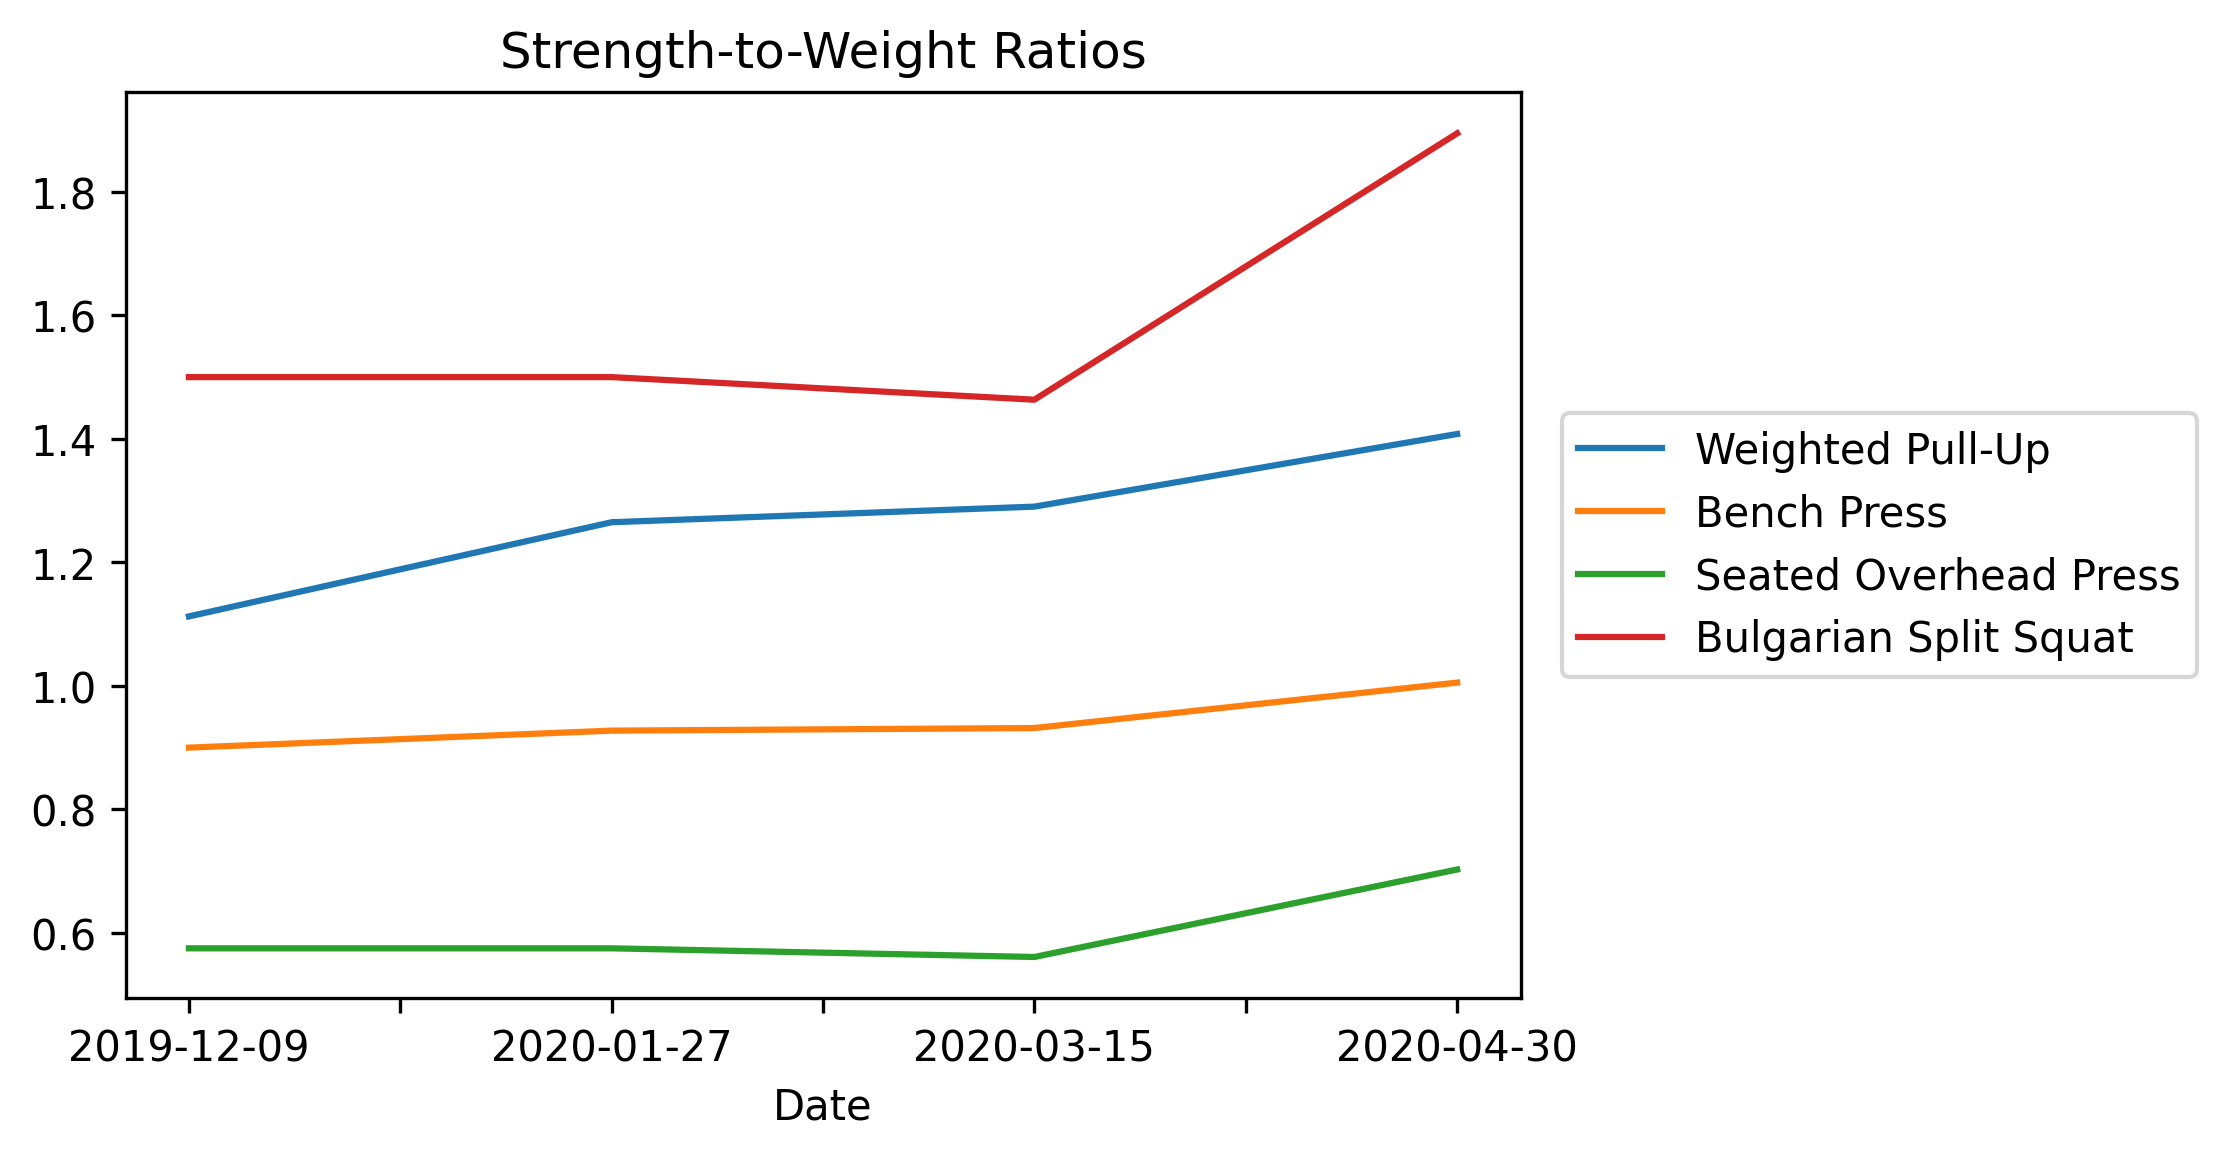 Strength-to-Weight Ratios